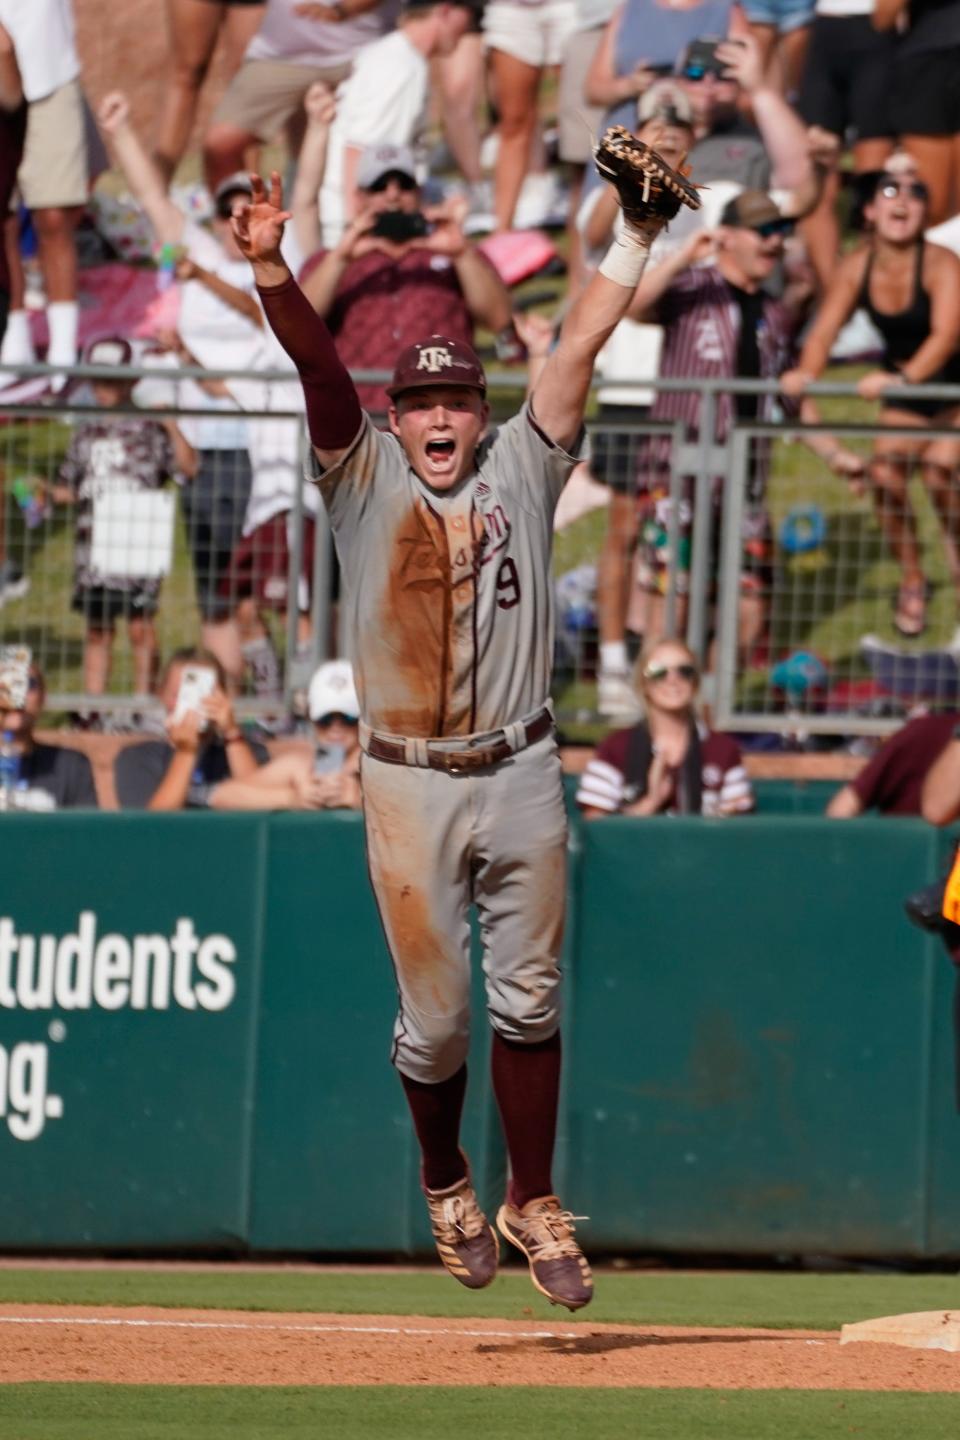 Texas A&M infielder Jack Moss celebrates after the Aggies' win over Louisville in Saturday's College Station Super Regional. A&M will face Oklahoma in the first round of the College World Series, and that winner will face either Texas or Notre Dame in the second round.